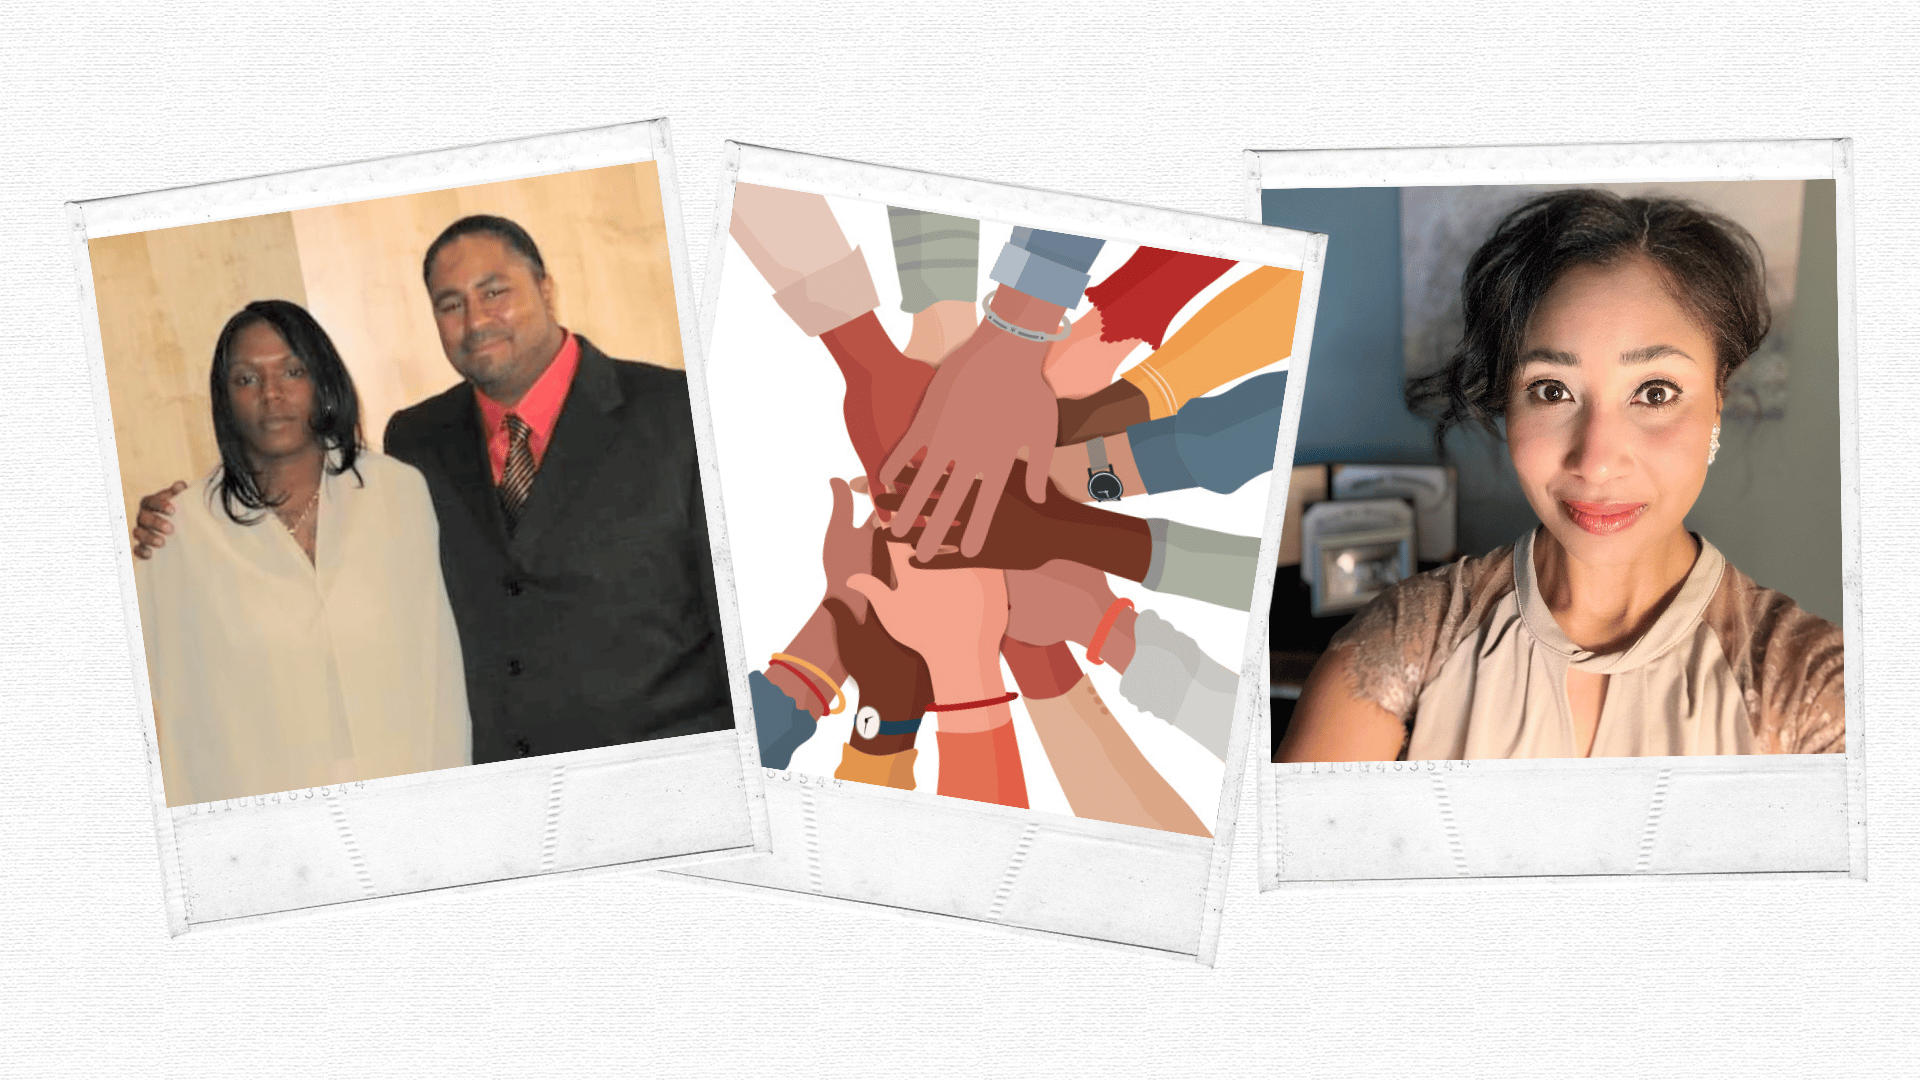 Three photos show a Black woman with a Black man whose arm is around her, an illustration of hands of various colors on top of each other, and a Black woman slightly smiling into the camera